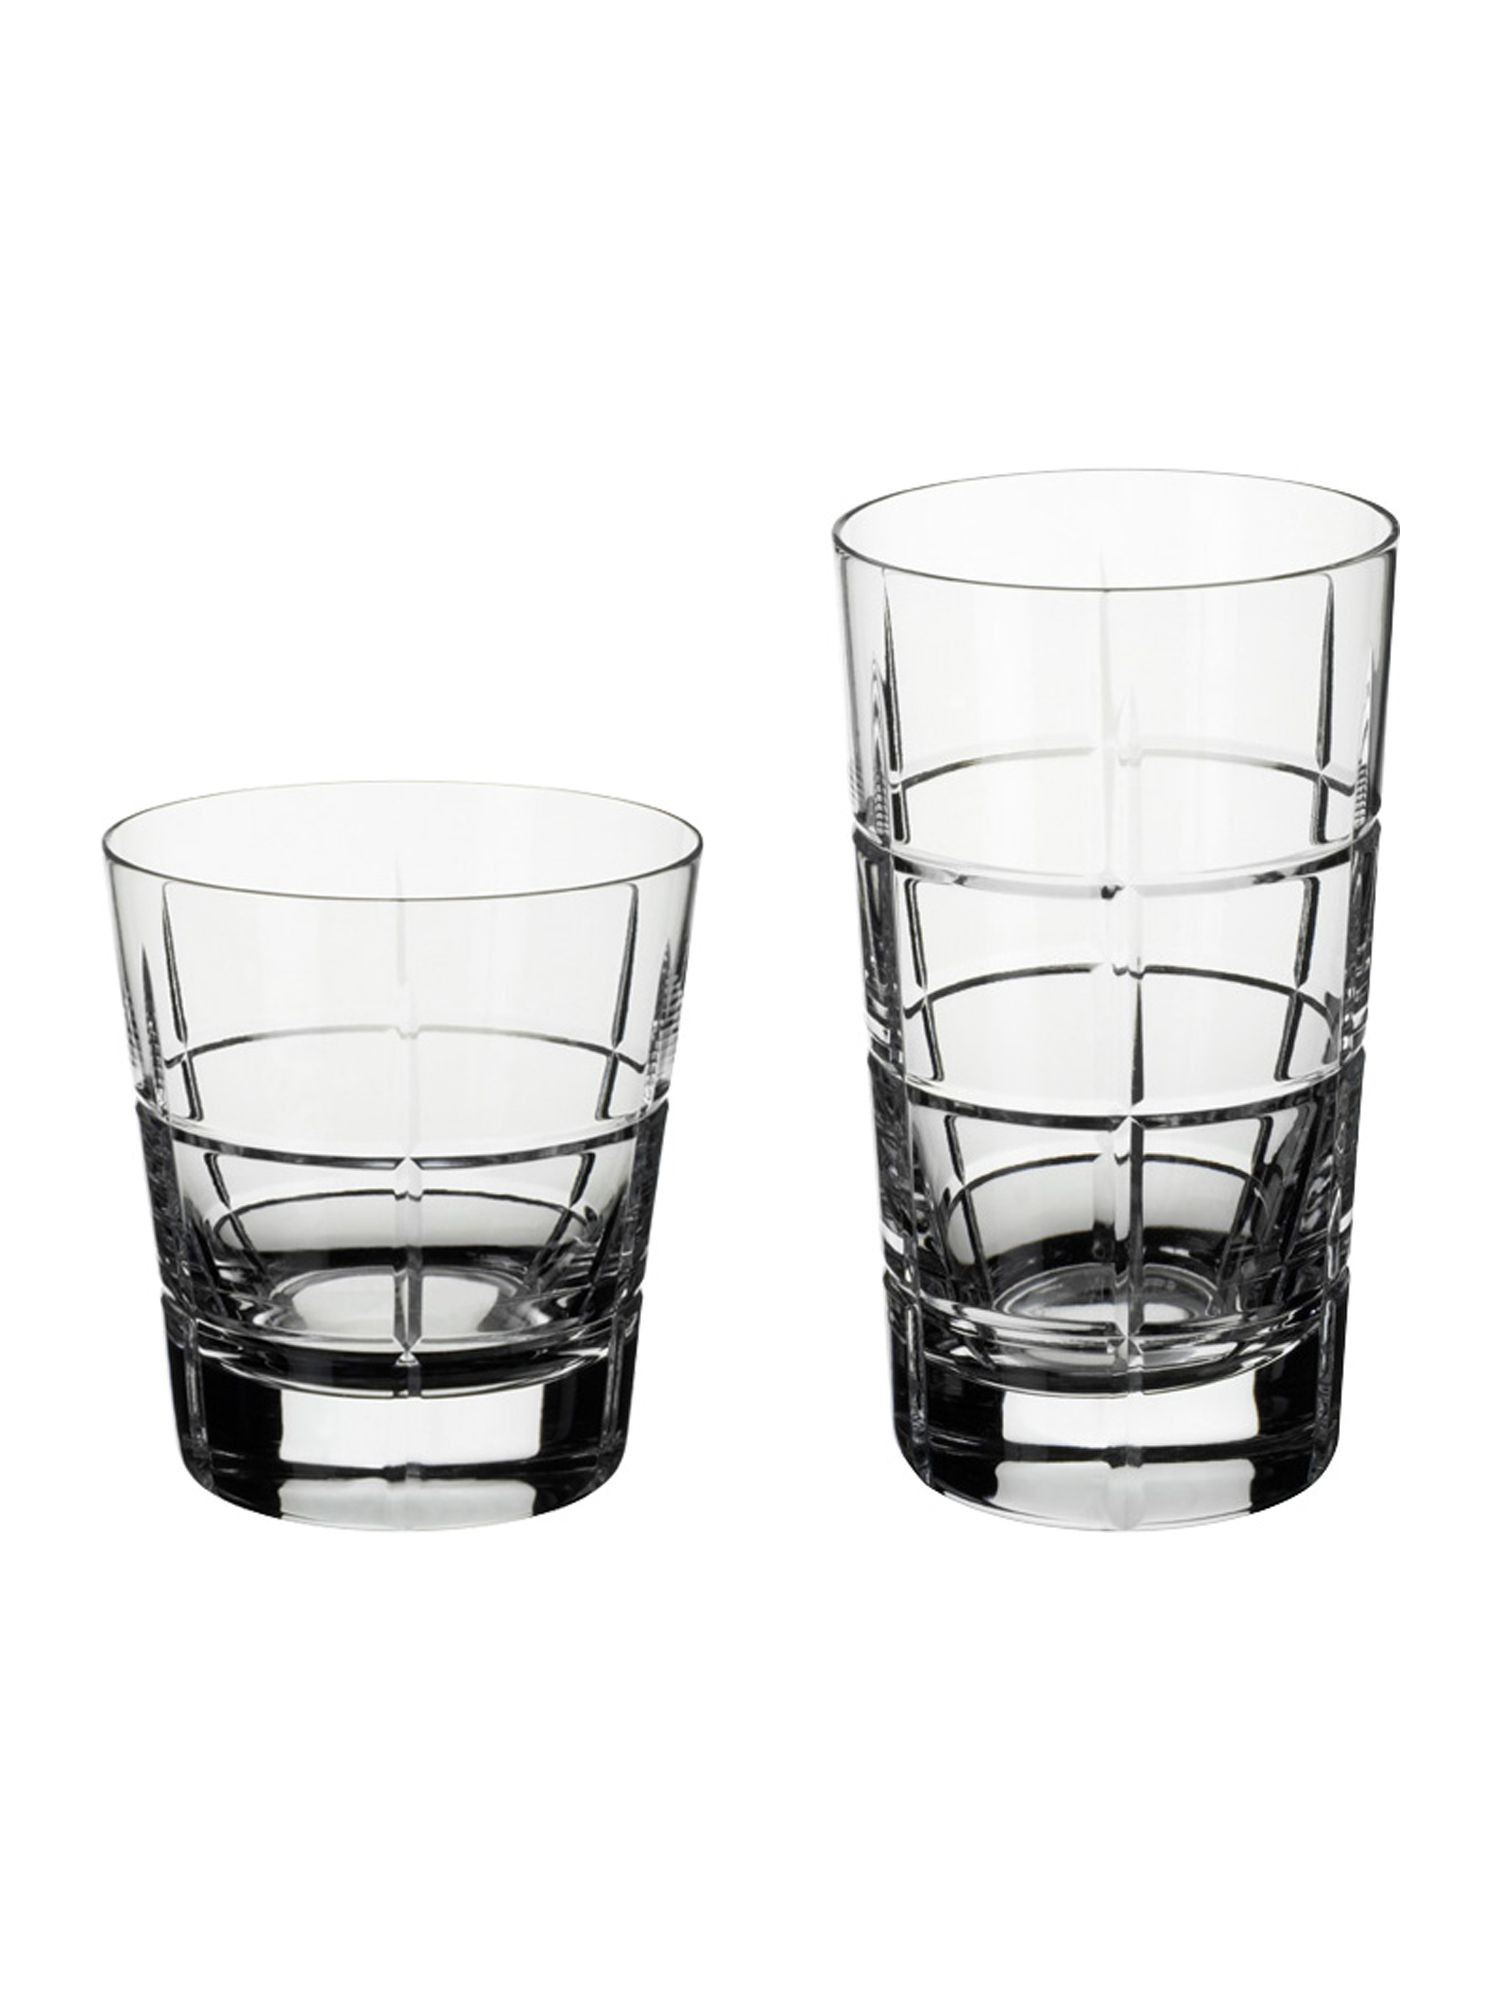 24 Stylish Villeroy and Boch Lead Crystal Vase 2024 free download villeroy and boch lead crystal vase of villeroy boch ardmore club tumbler glass range house of fraser pertaining to g 4003686246867 50 20141010